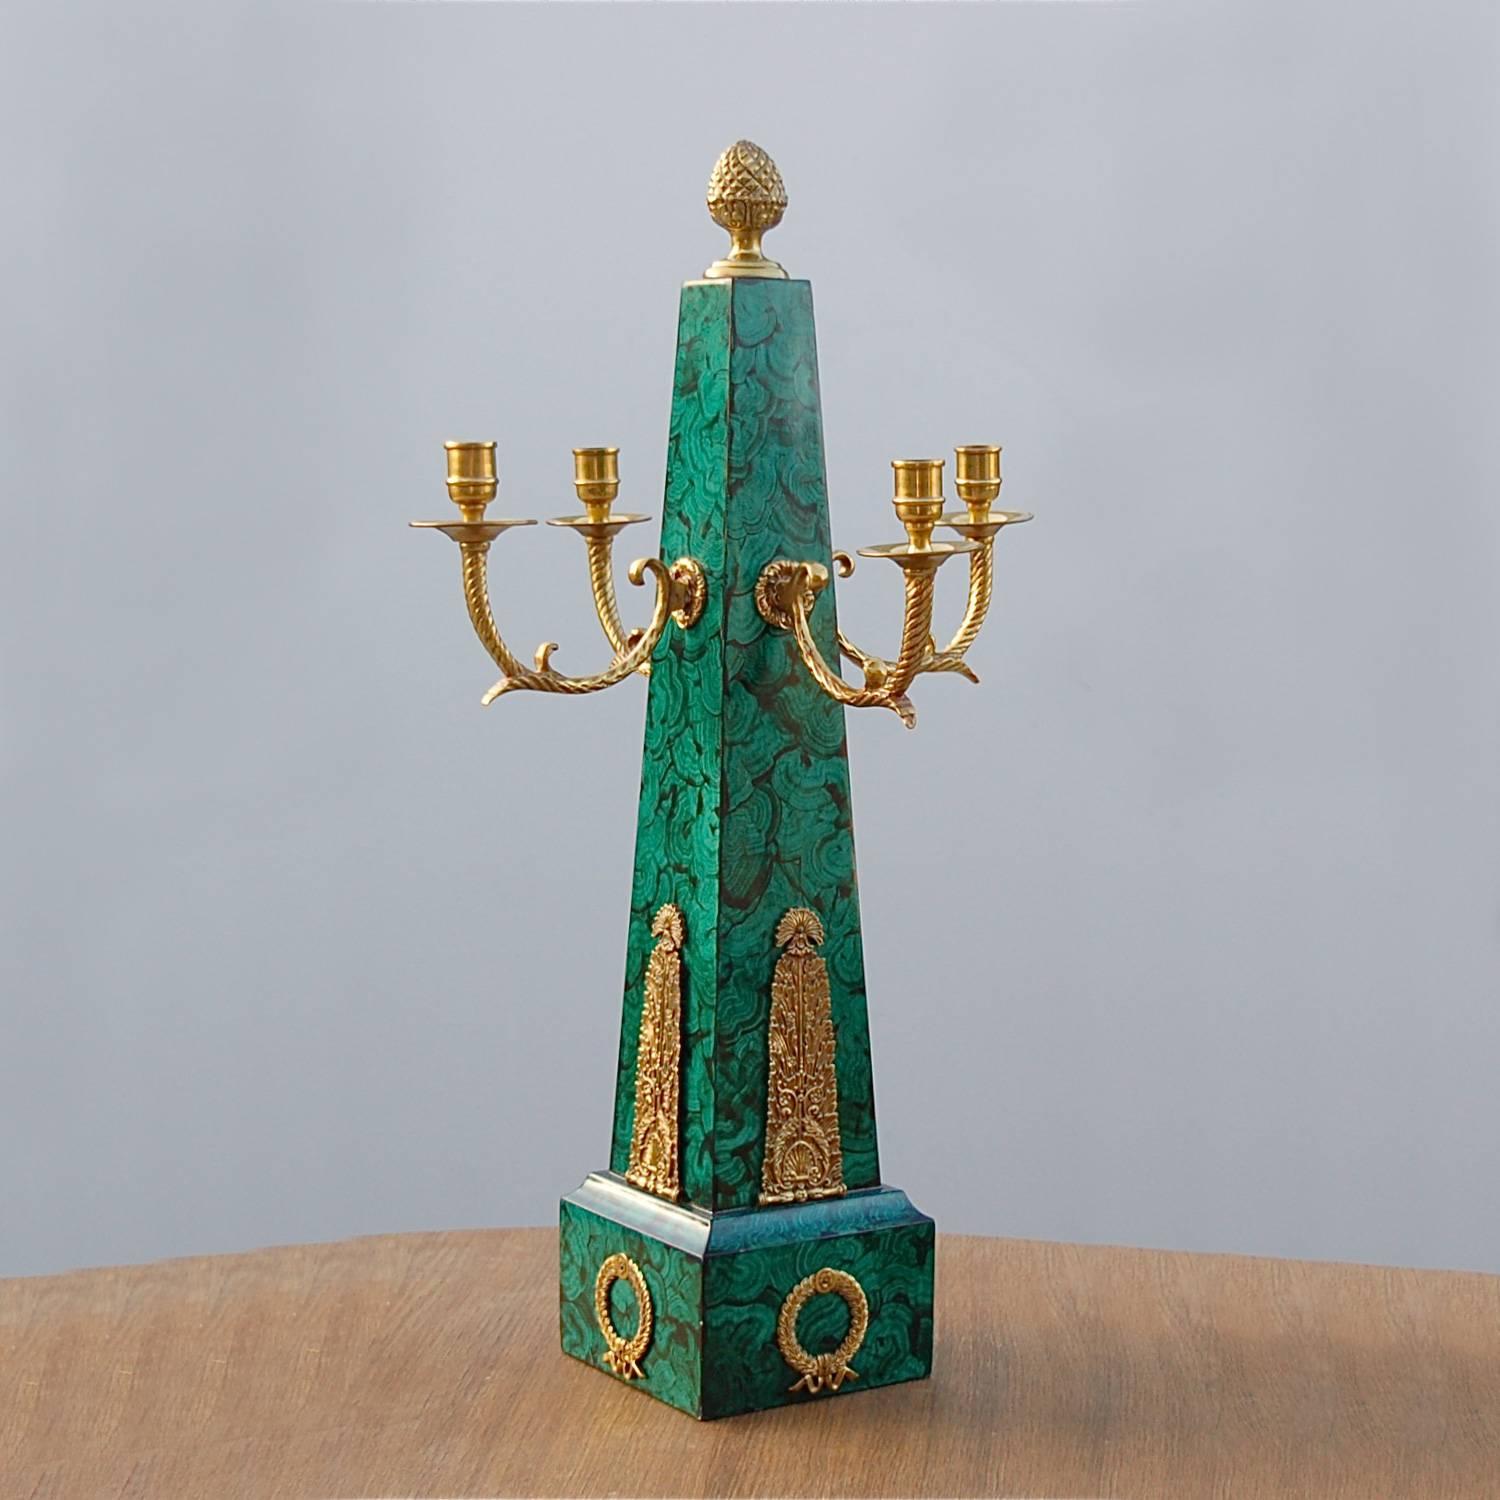 Maitland-Smith are designers and makers of luxury home furniture and decorative objects for the home. This is an example of their work: a large, neoclassical, obelisk-shaped candelabra with a faux malachite finish and four brass candleholders. All